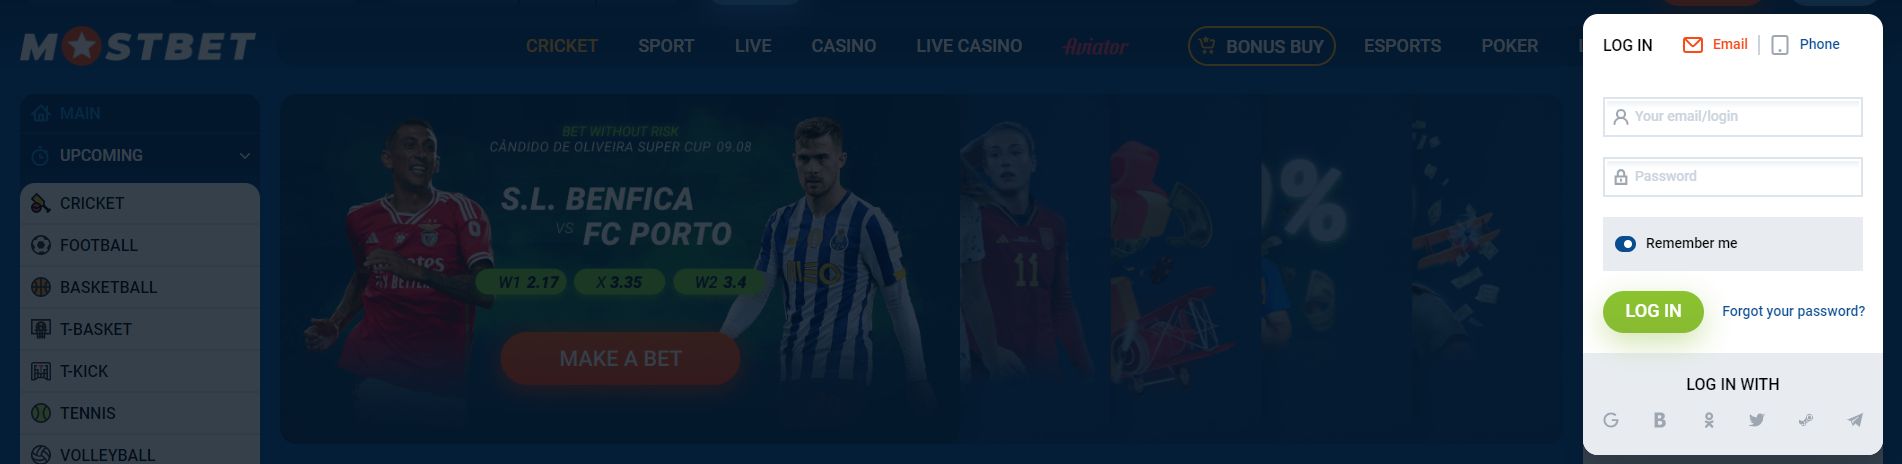 Login into Mostbet India